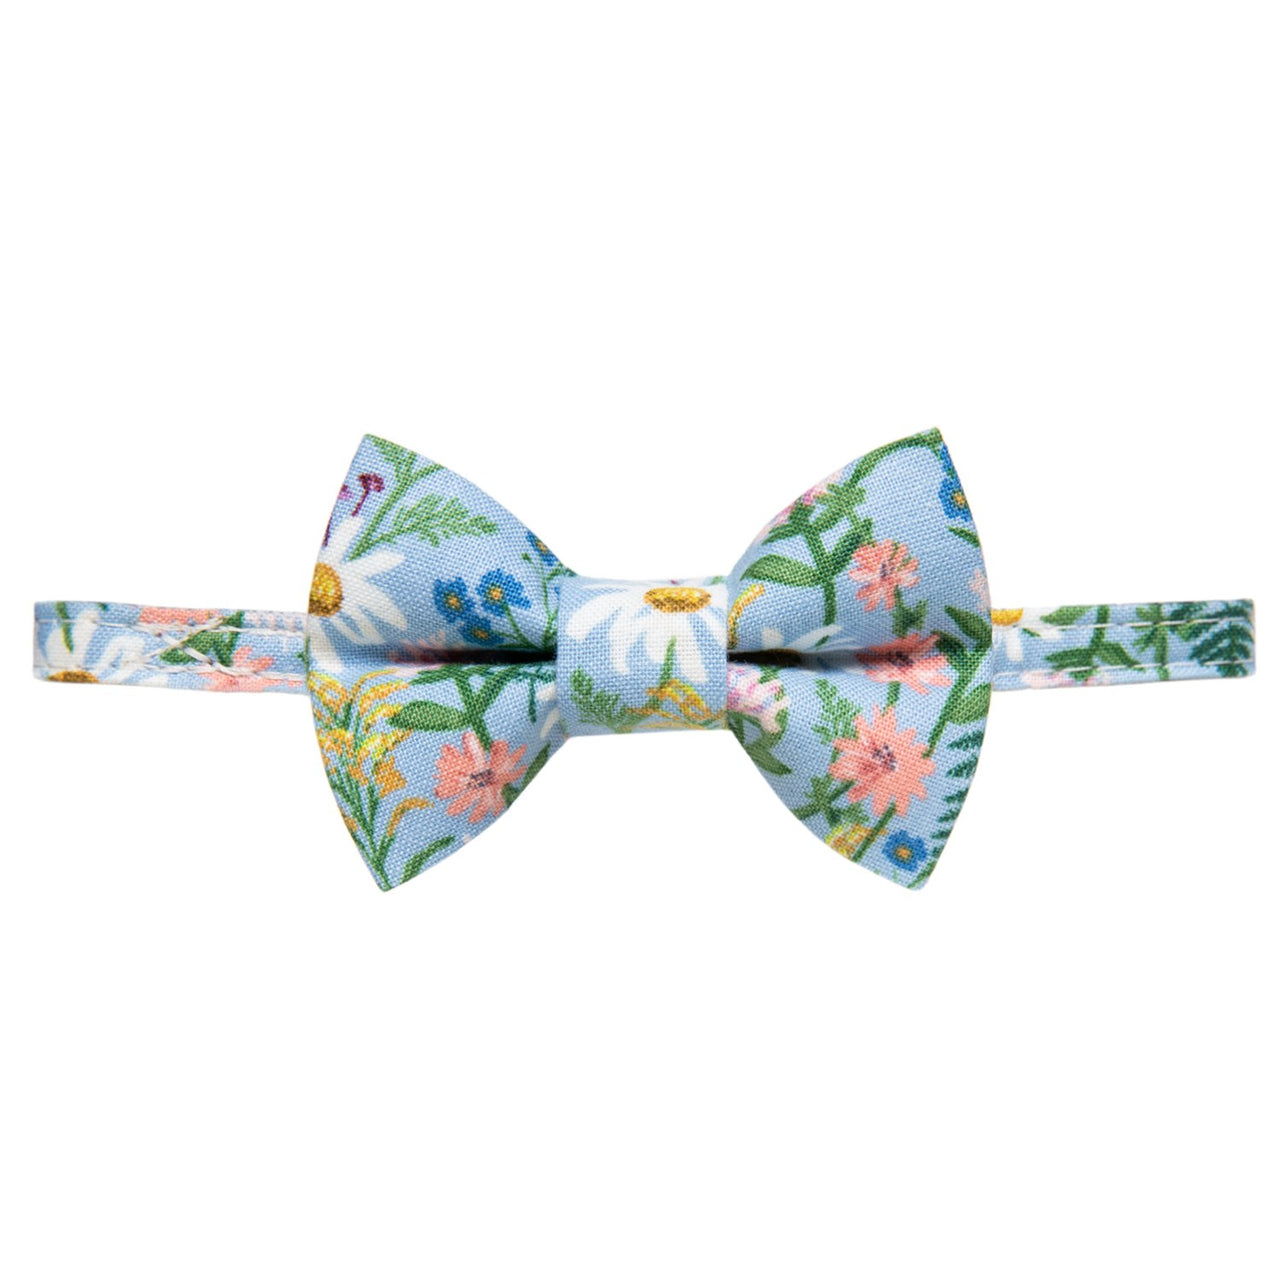 The Oopsie Daisy Collar + Matching Removable Bow Tie